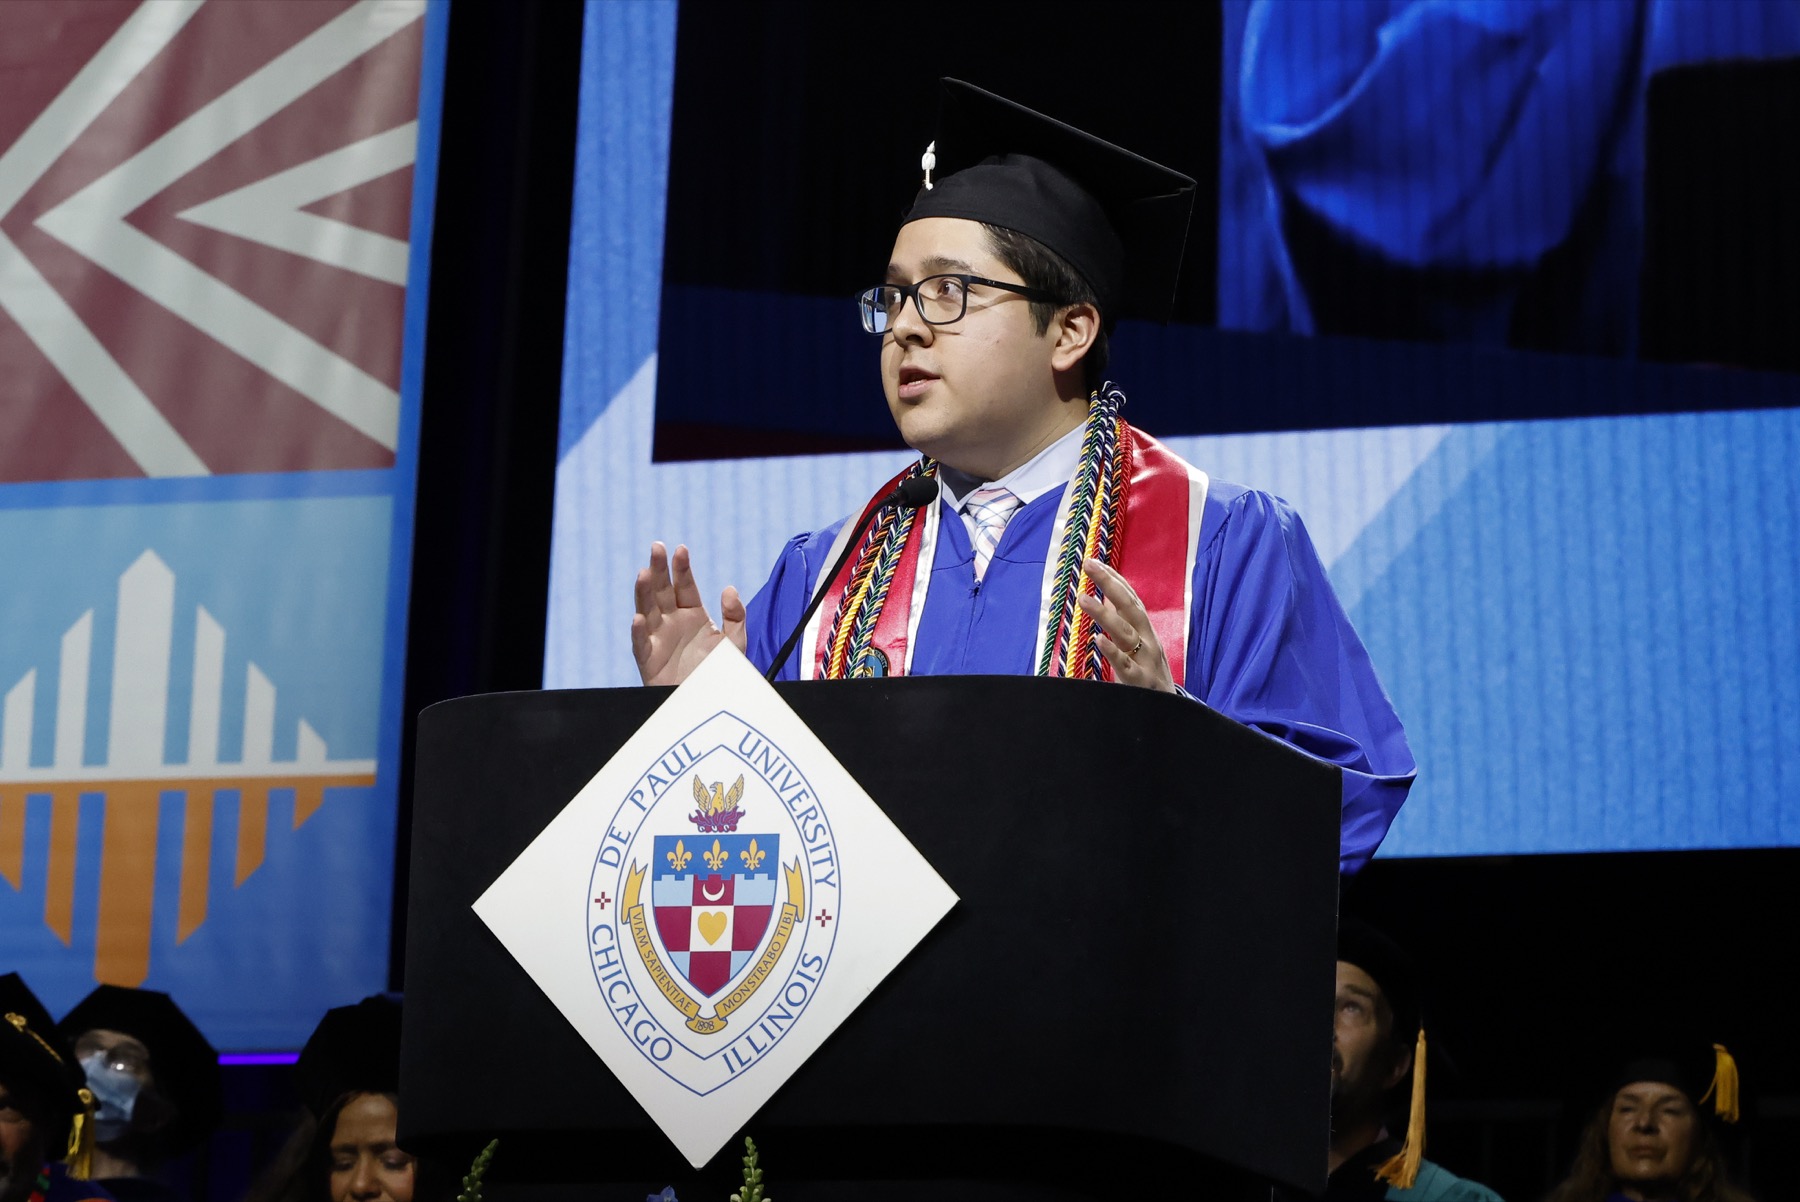 Lenin Plazas, student speaker, shared his story as the child of immigrant parents, a DACA-dreamer and now a first-generation DePaul graduate.